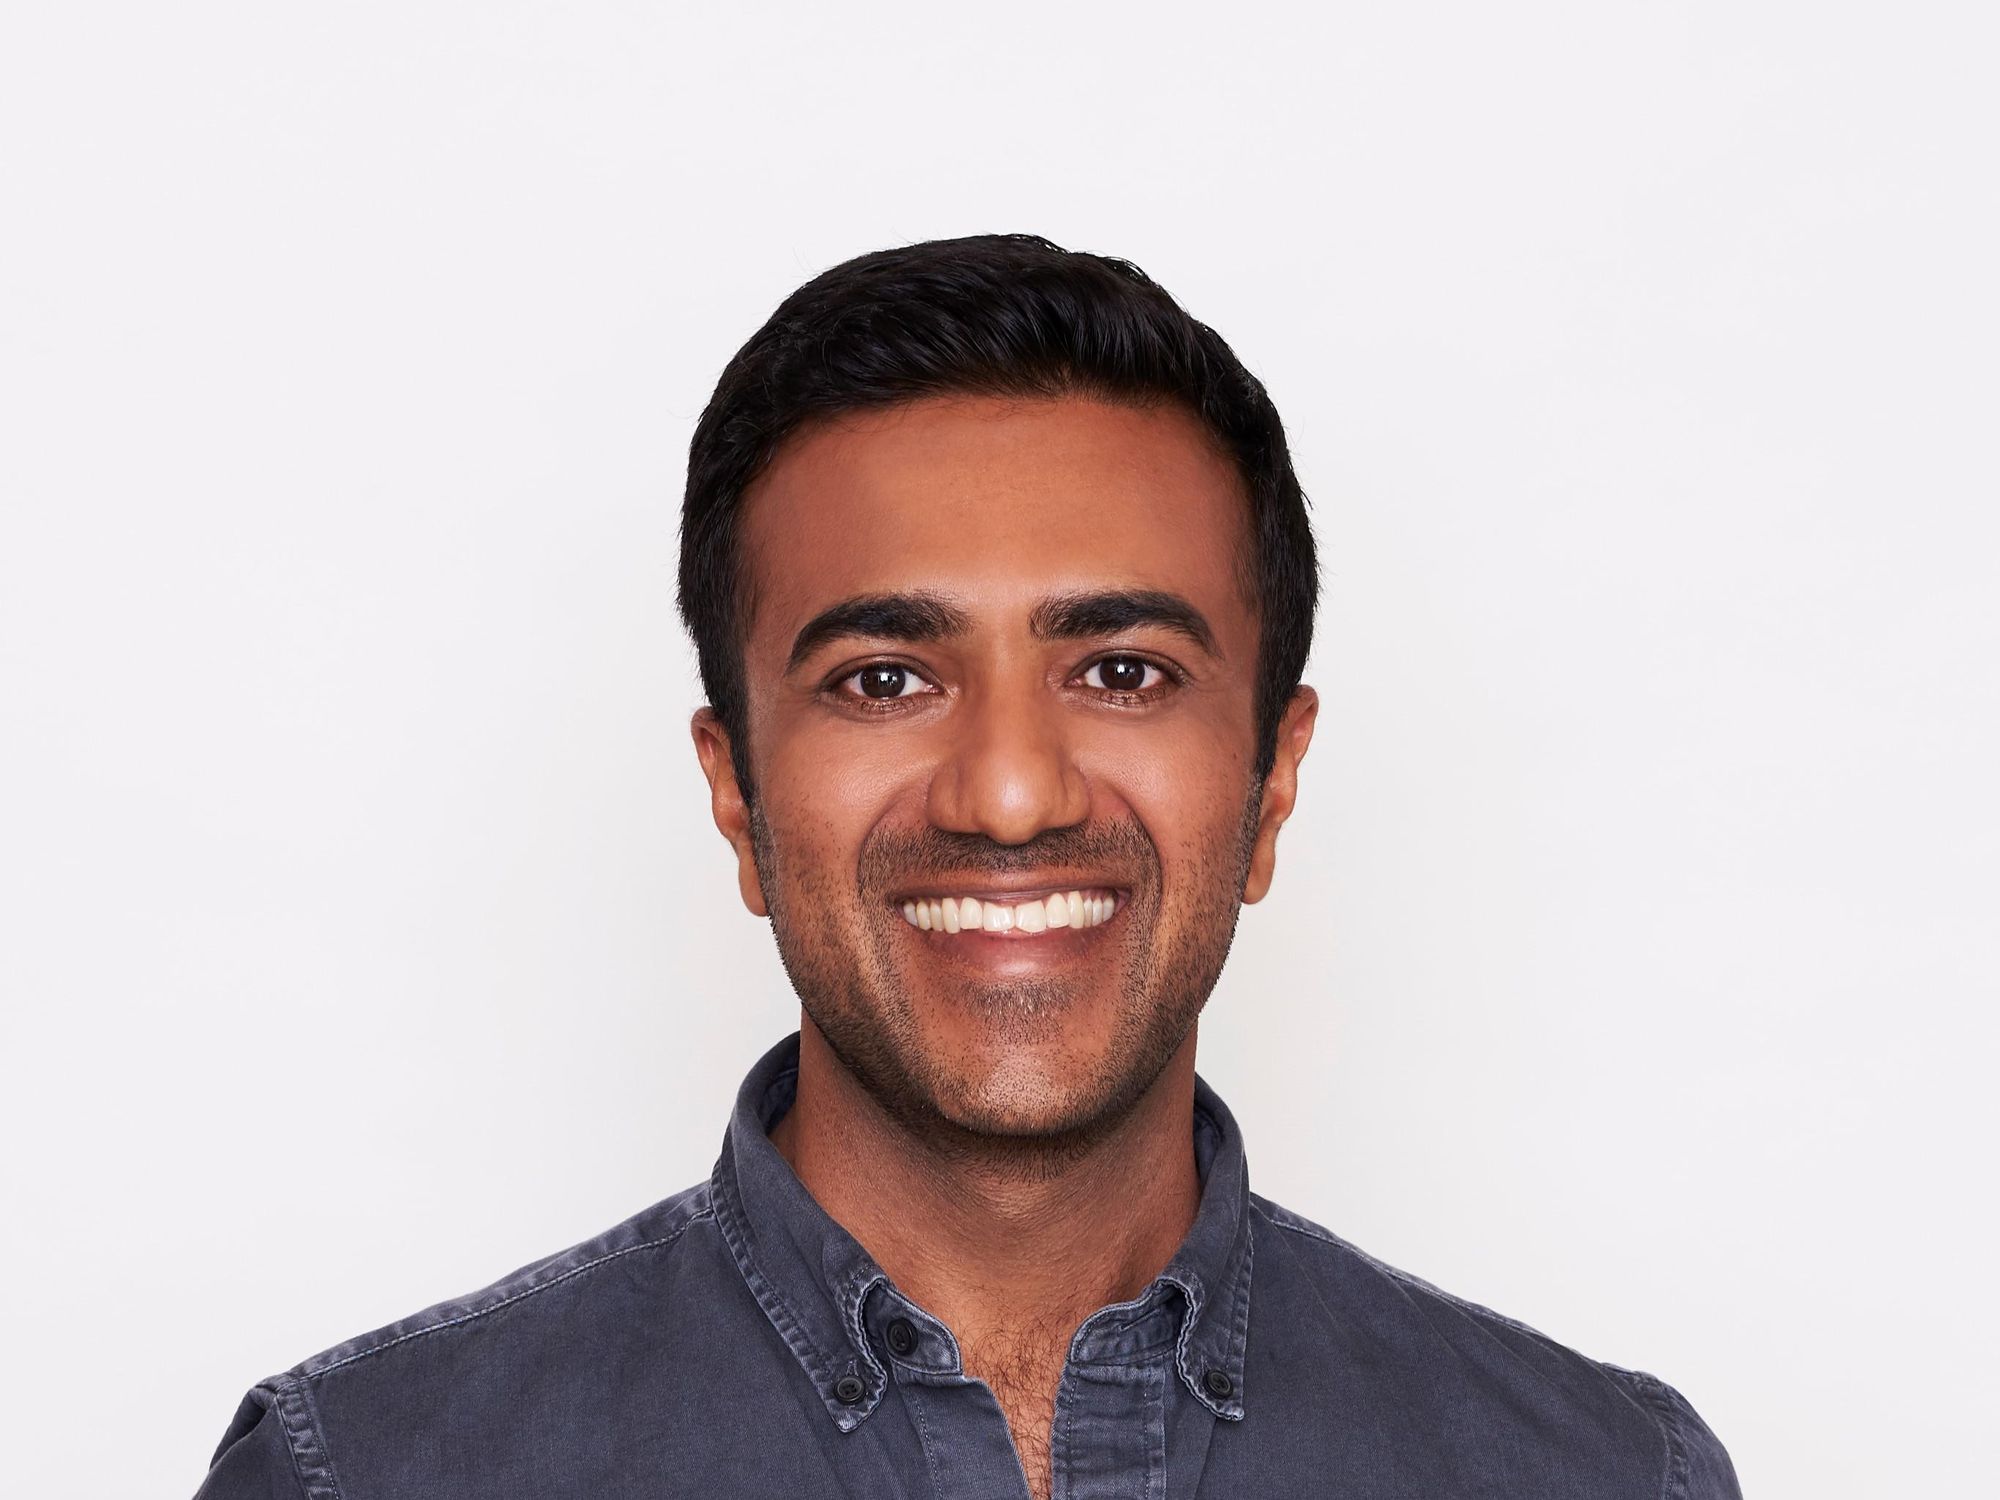 LA Venture: As Competition Tightens, Threshold Ventures’ Chirag Chotalia Focuses on What Matters